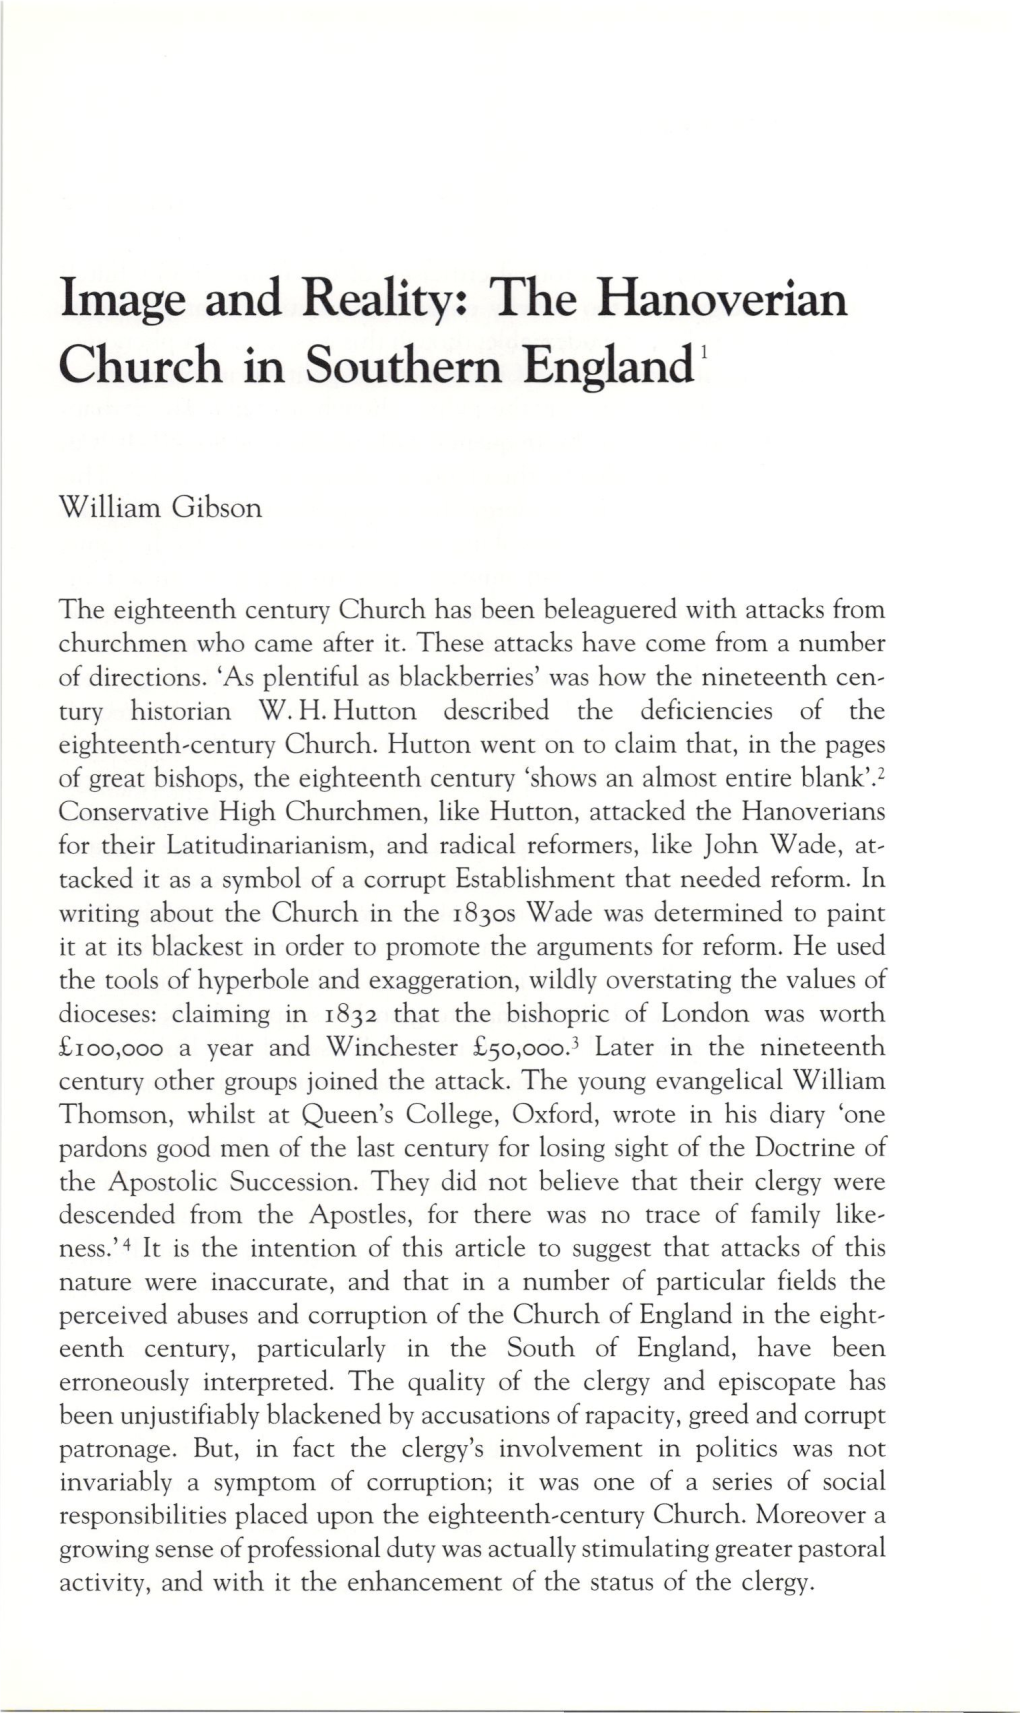 Image and Reality: the Hanoverian Church in Southern England1